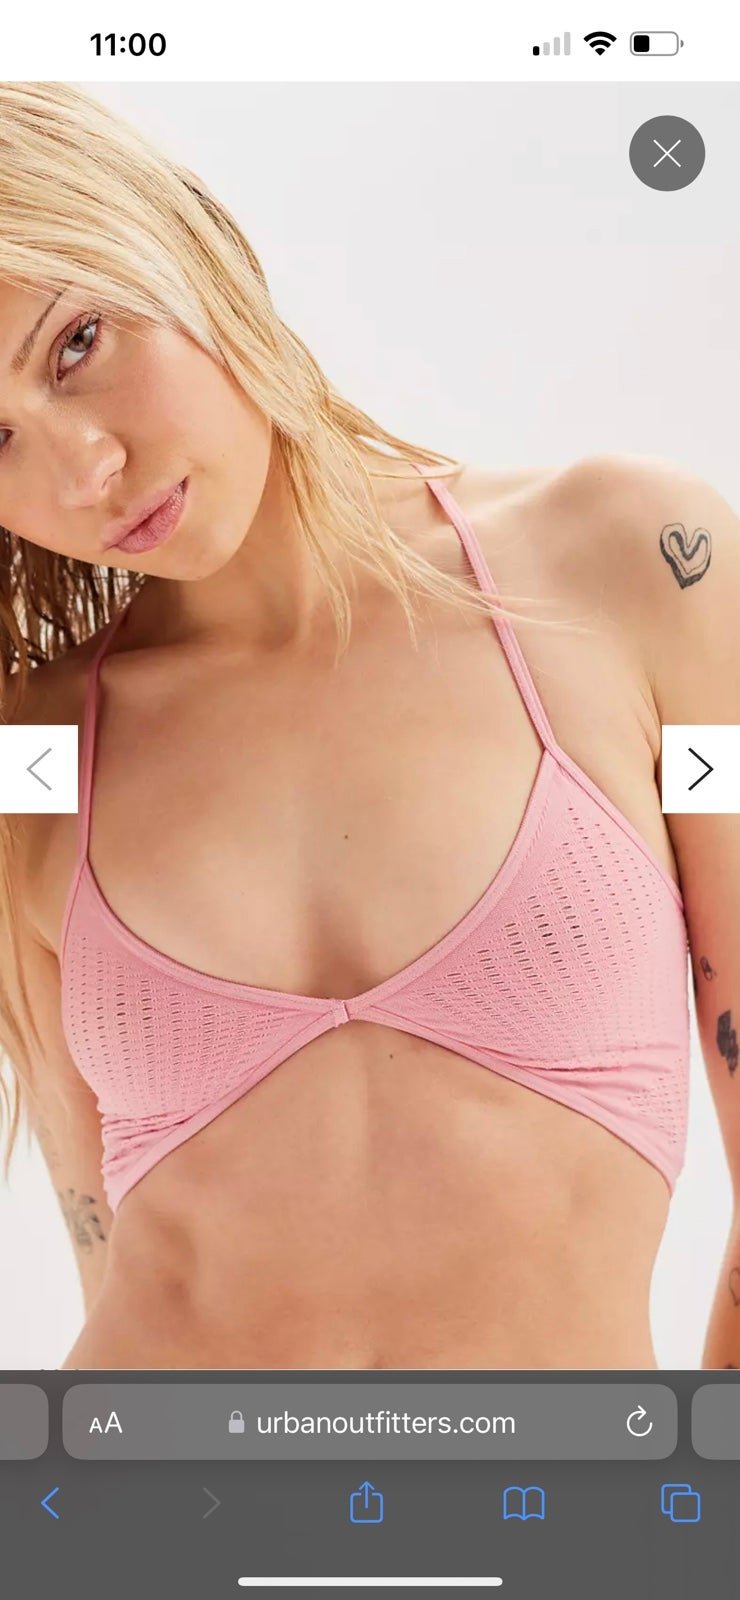 save up to 70% Bralette top OpETZY0lX all for you